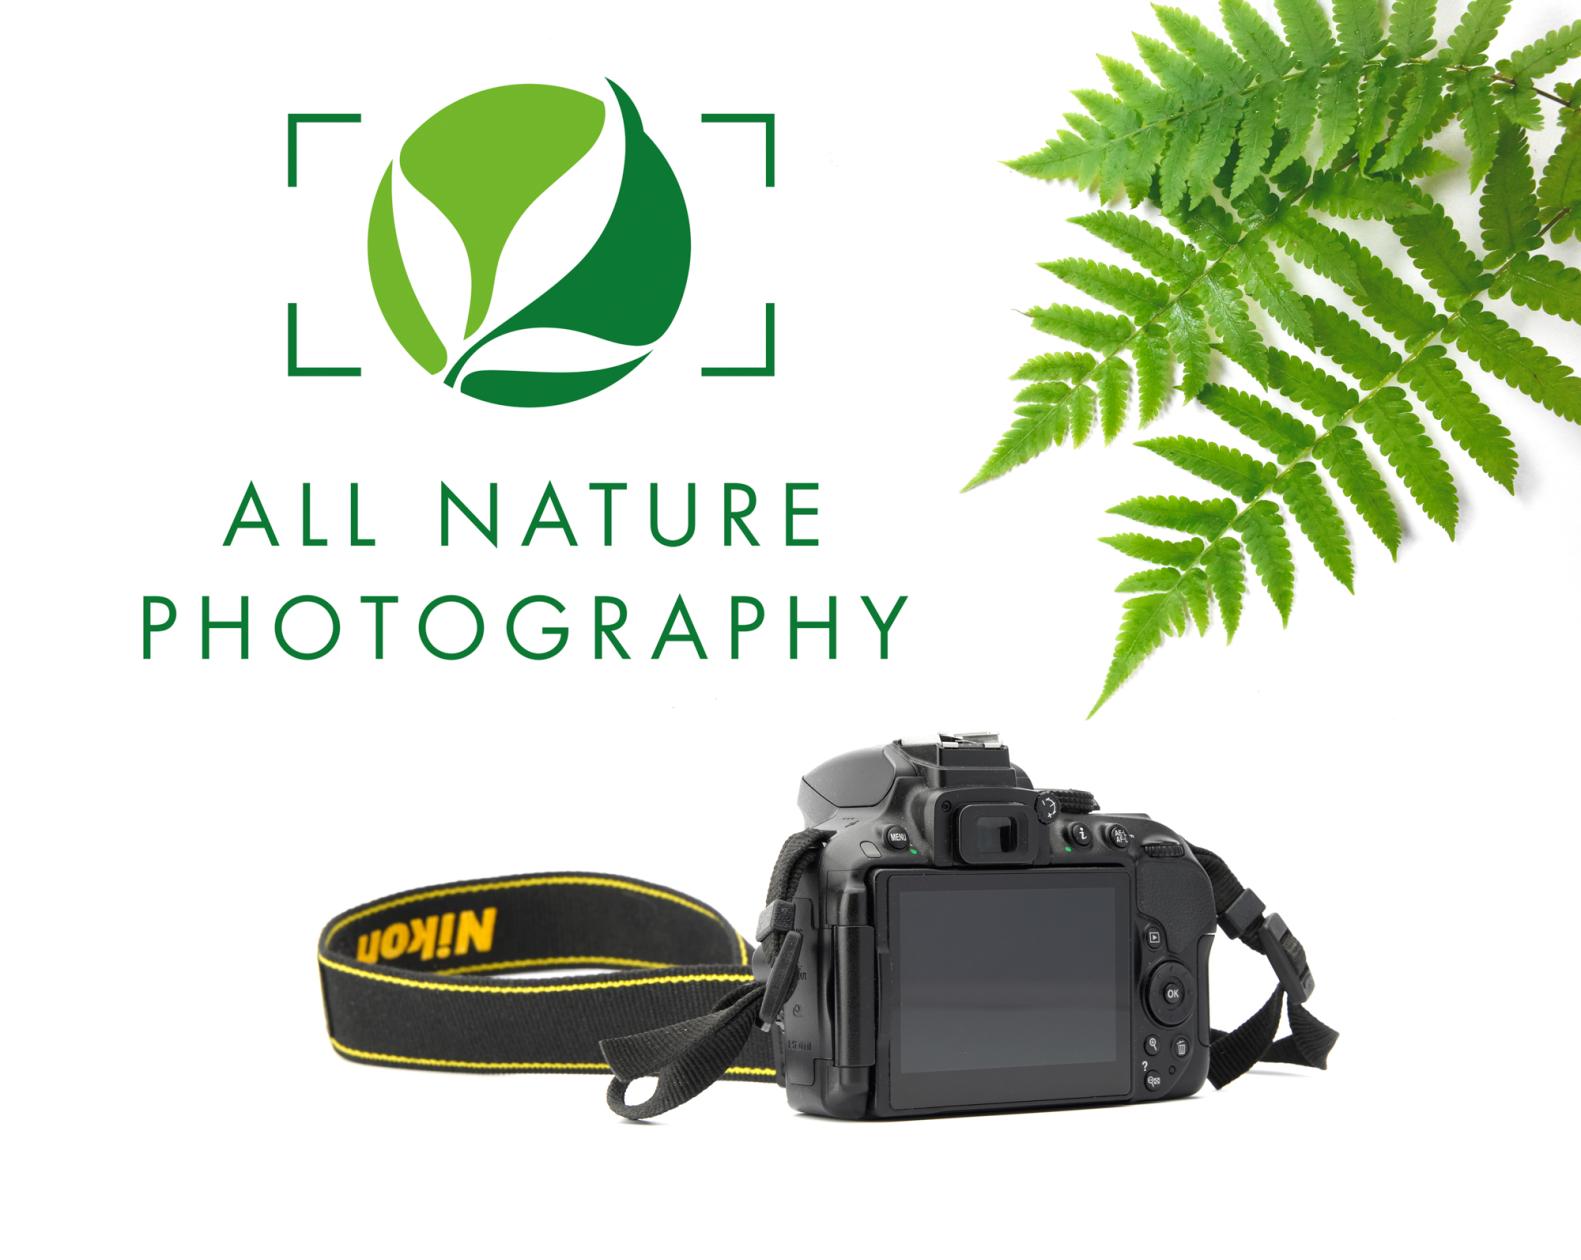 All nature Photography - Fotograaf